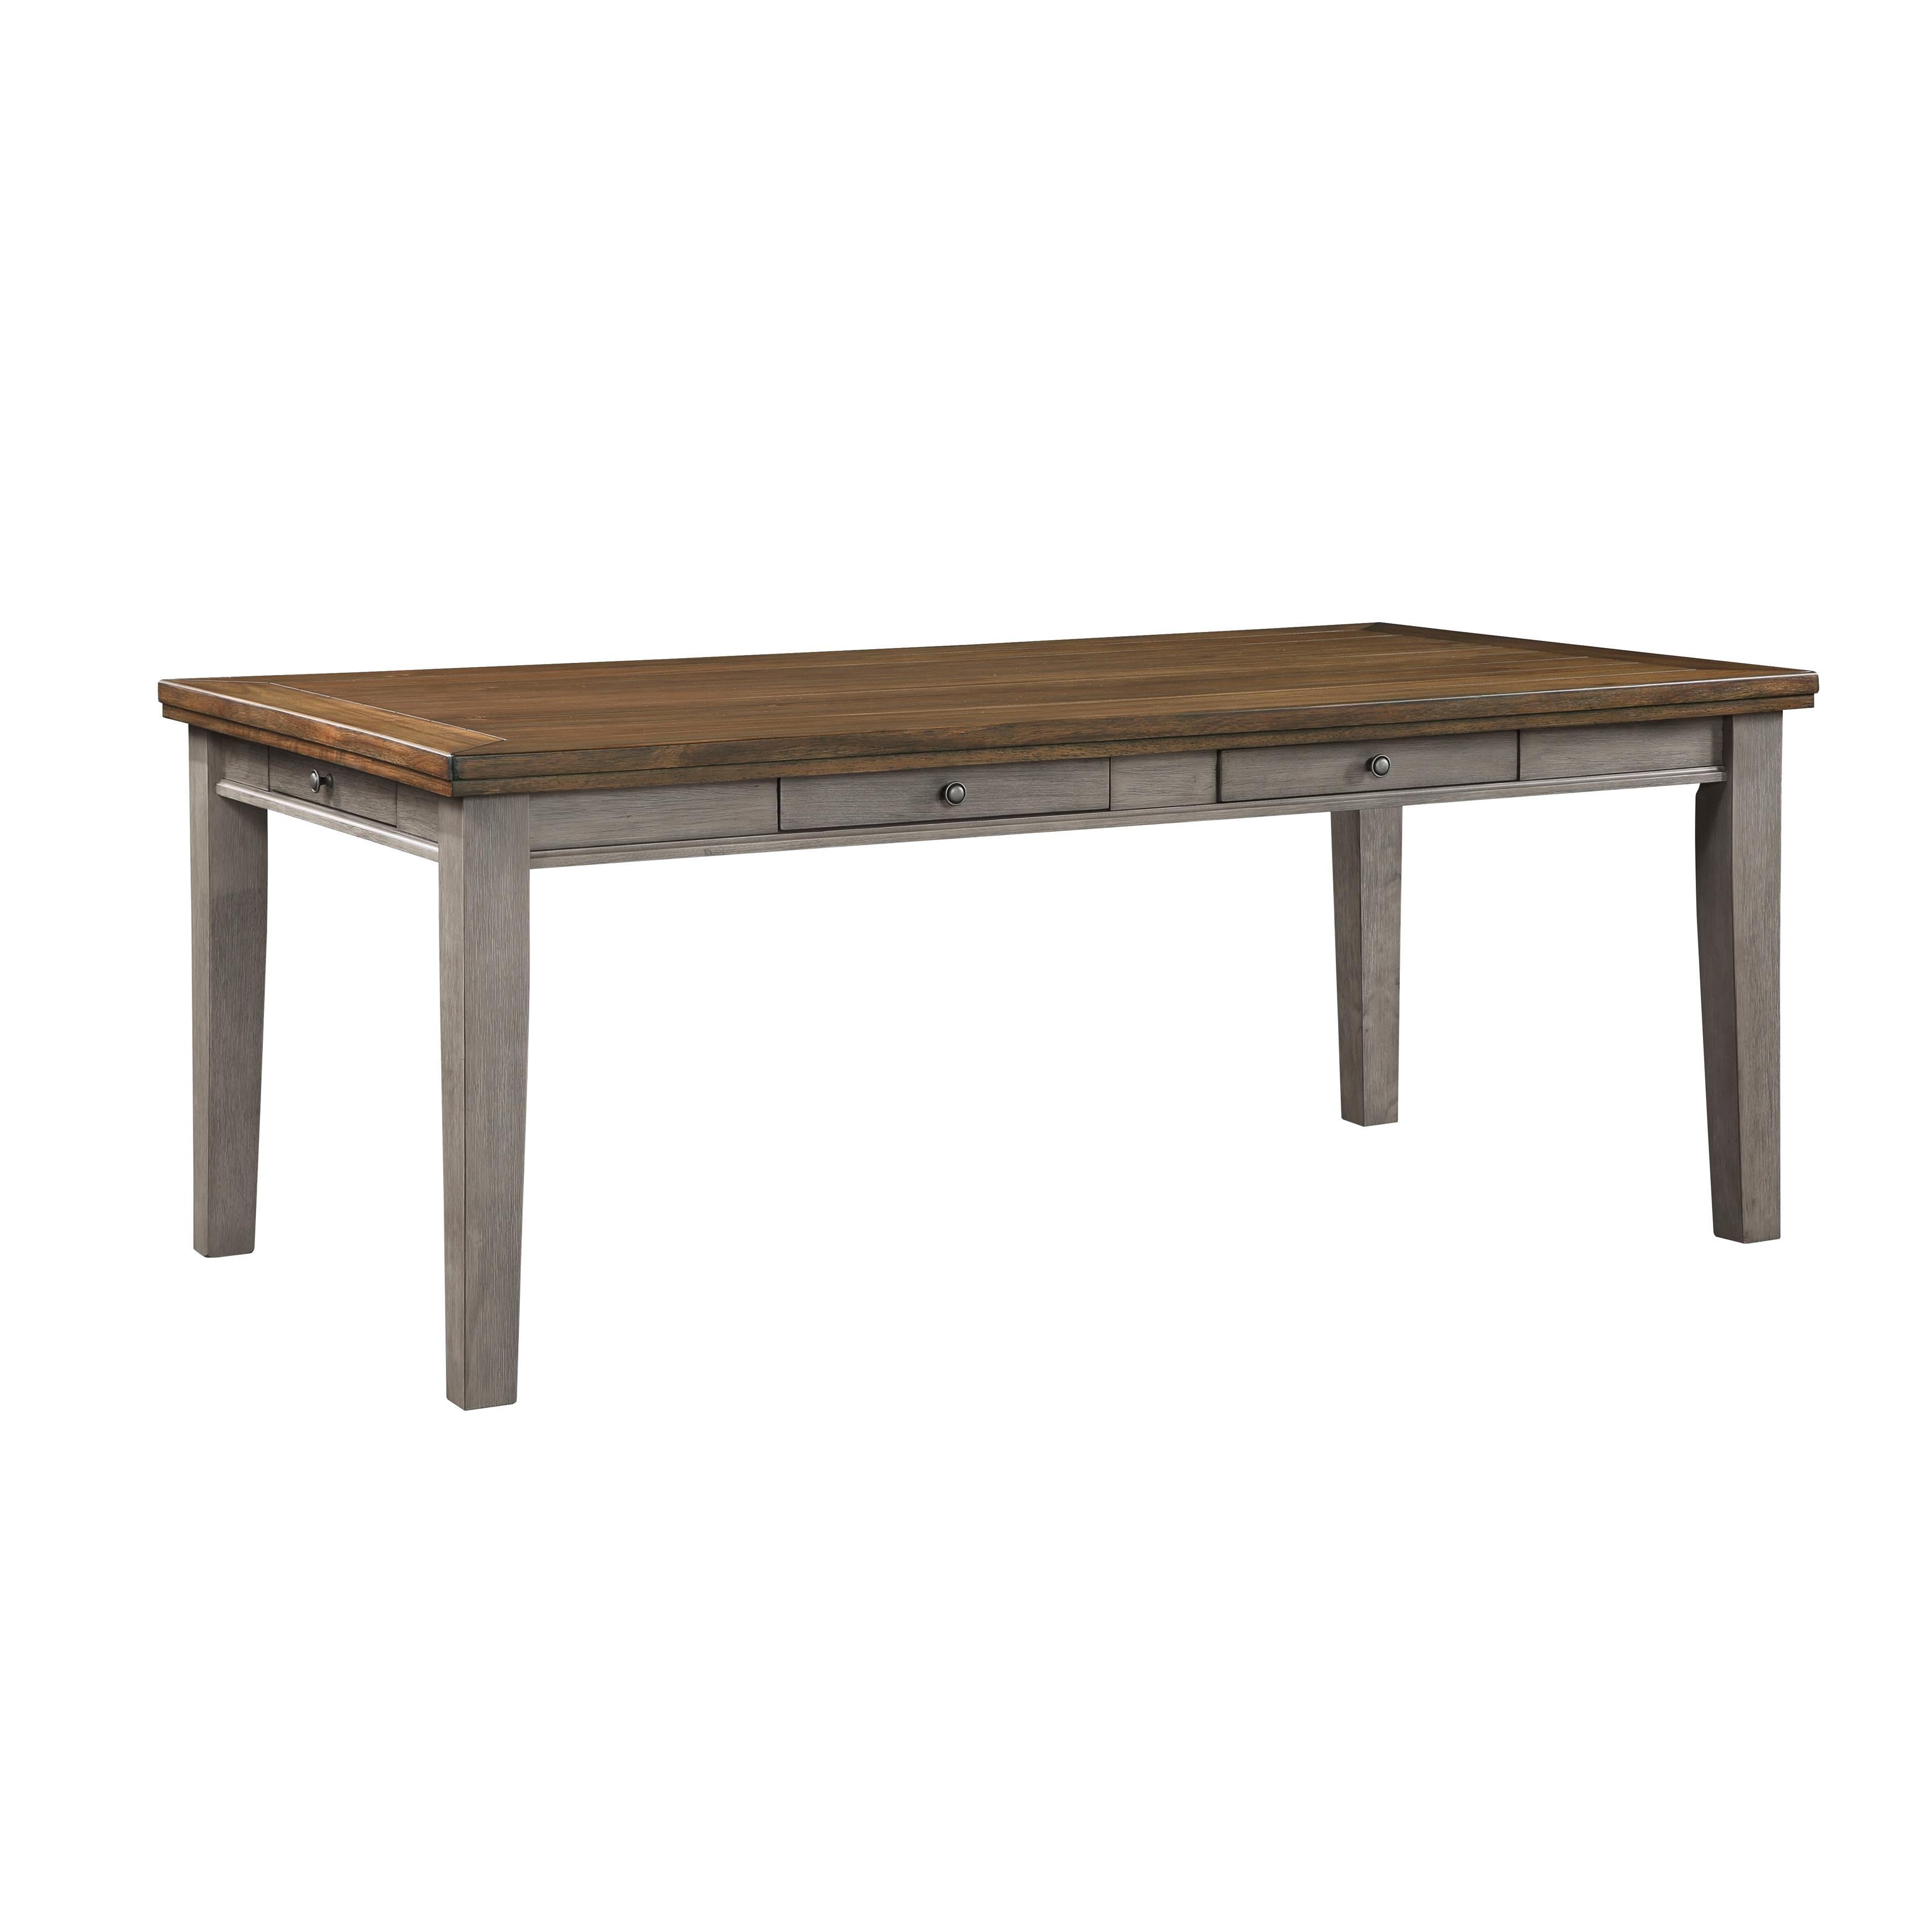 Modern, Traditional Dining Table Tigard Dining Table 5761GY-78-T 5761GY-78-T in Cherry, Gray 